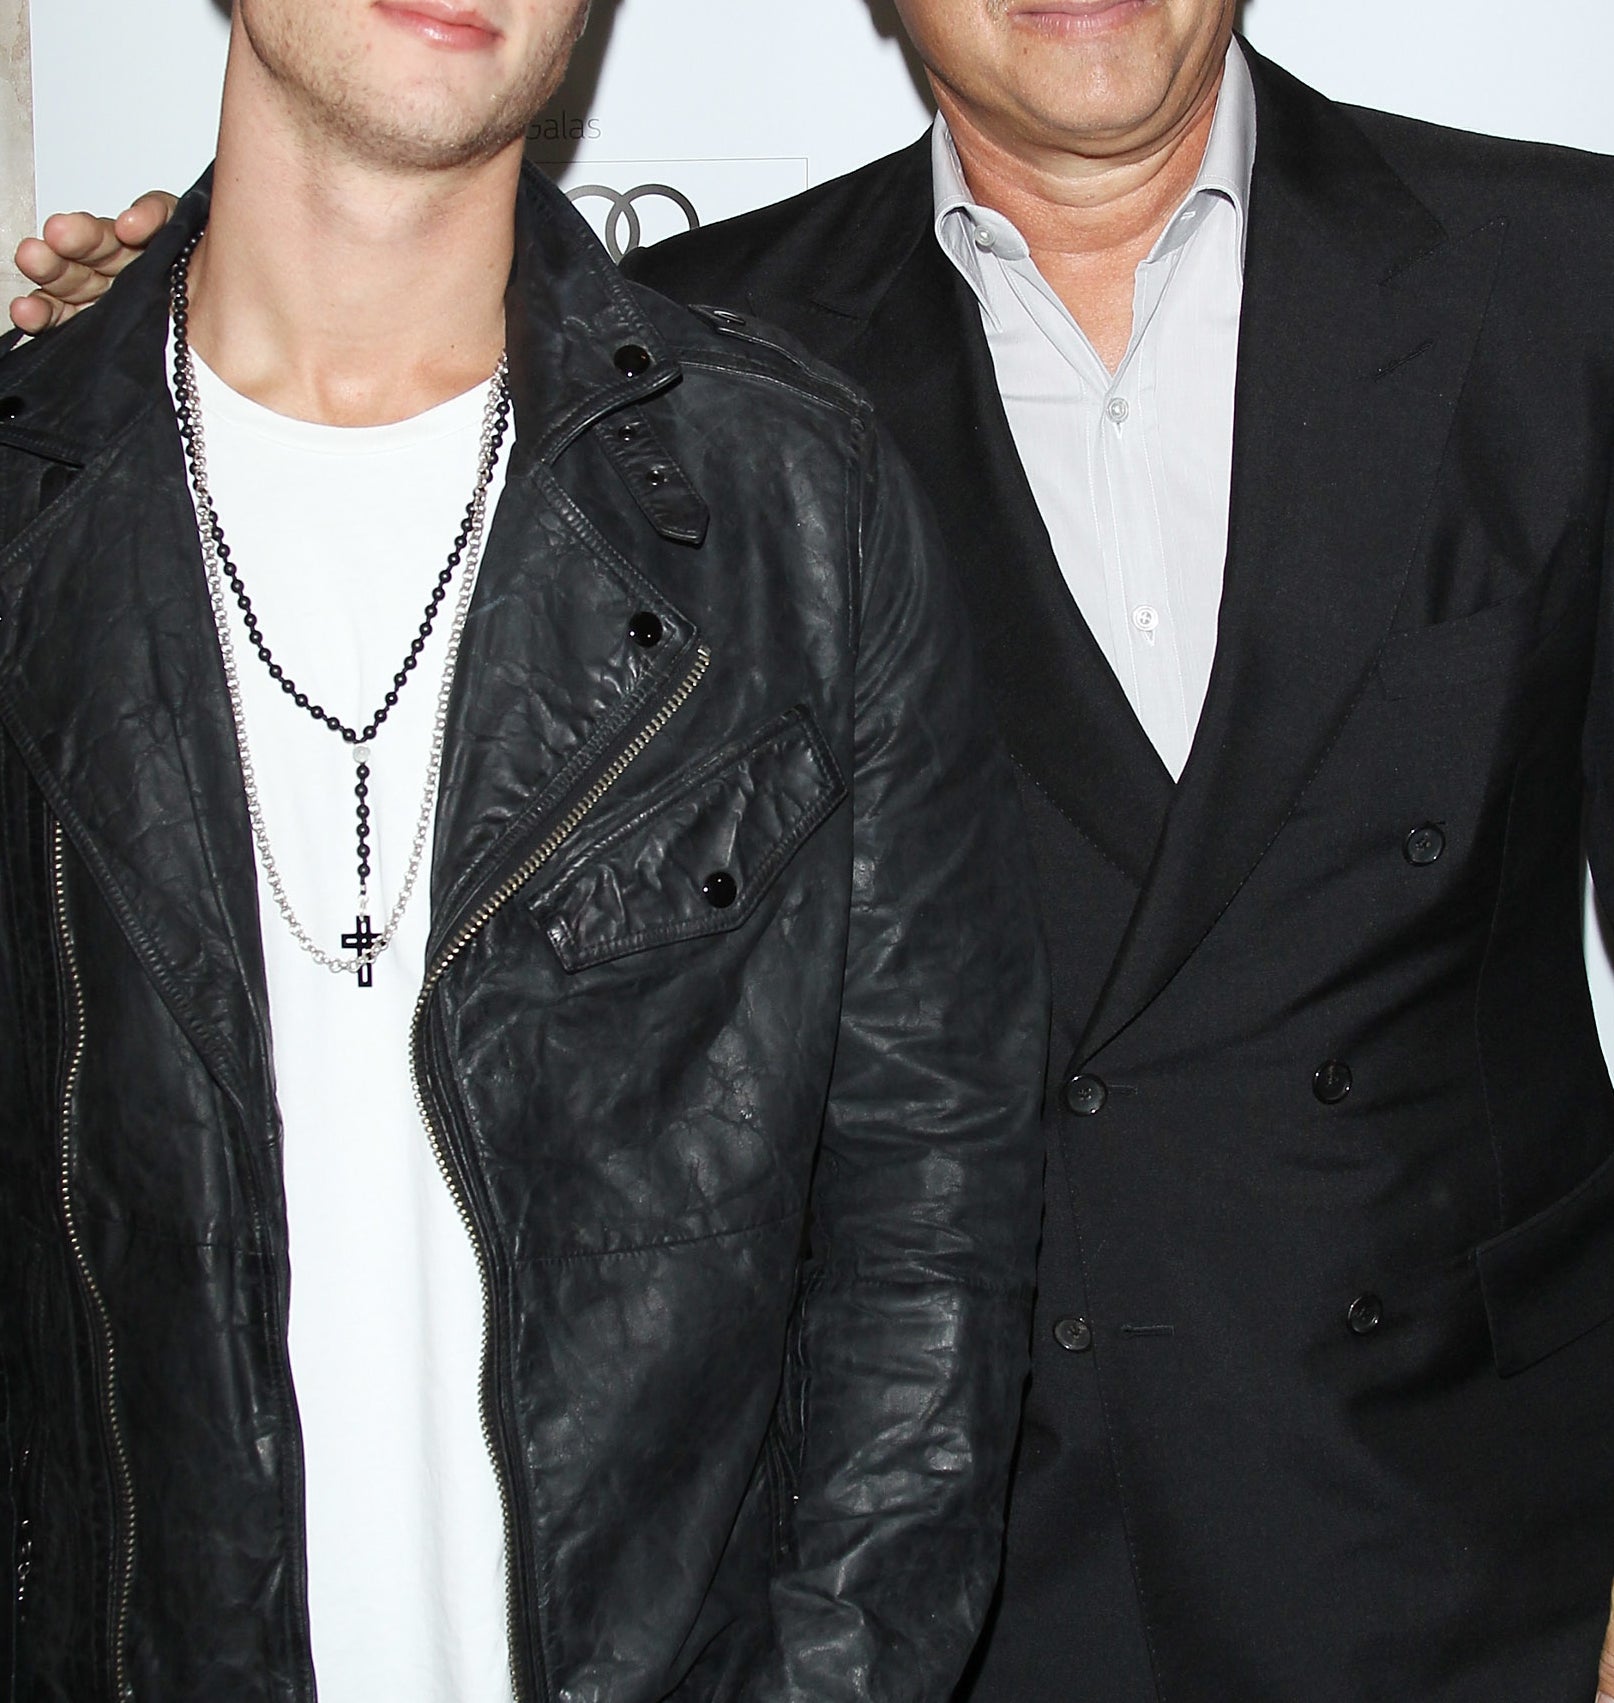 Tom Hanks and Chet Hanks pose together at a Toronto International Film Festival event. Chet is wearing a leather jacket, and Tom is in a suit